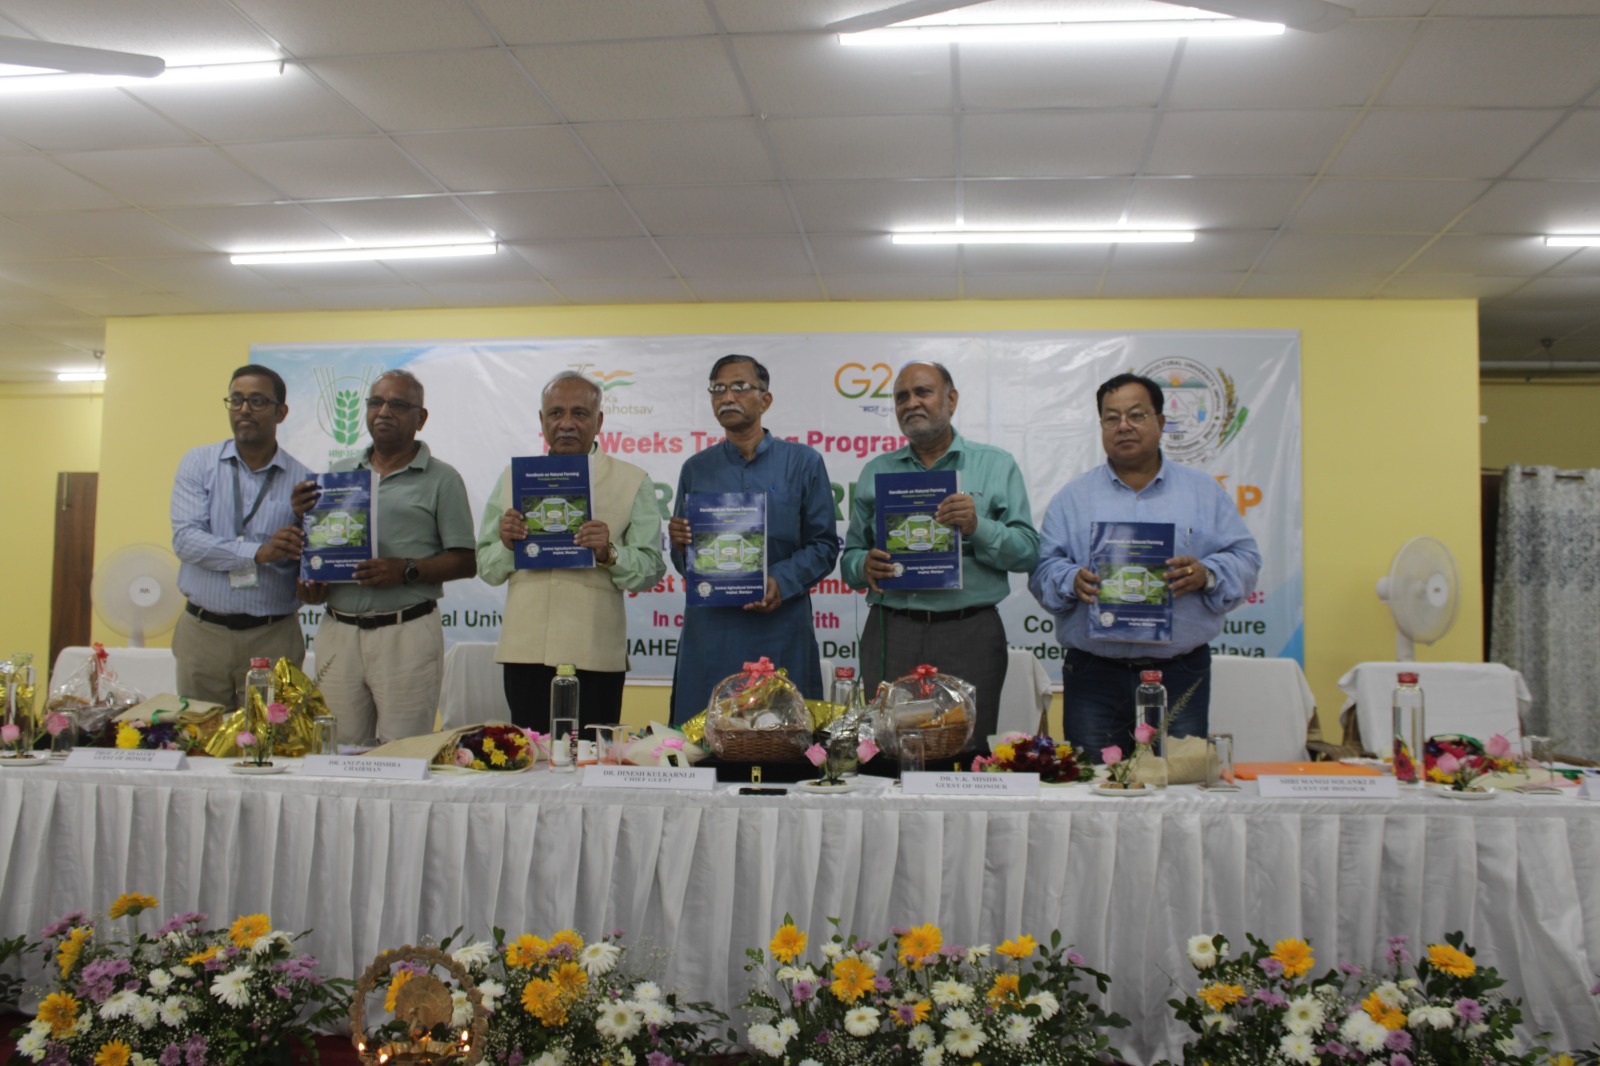 College of Agriculture, CAU, Kyrdemkulai hosts two weeks training on Natural Farming under IDP-NAHEP. Dr. Anupam Mishra, Hon’ble Vice Chancellor, CAU, Imphal, Chaired the event. Prof. Dwipendra Thakuria, Dean, College of Agriculture, Kyrdemkulai and Course Director welcomed the dignitaries and participants.